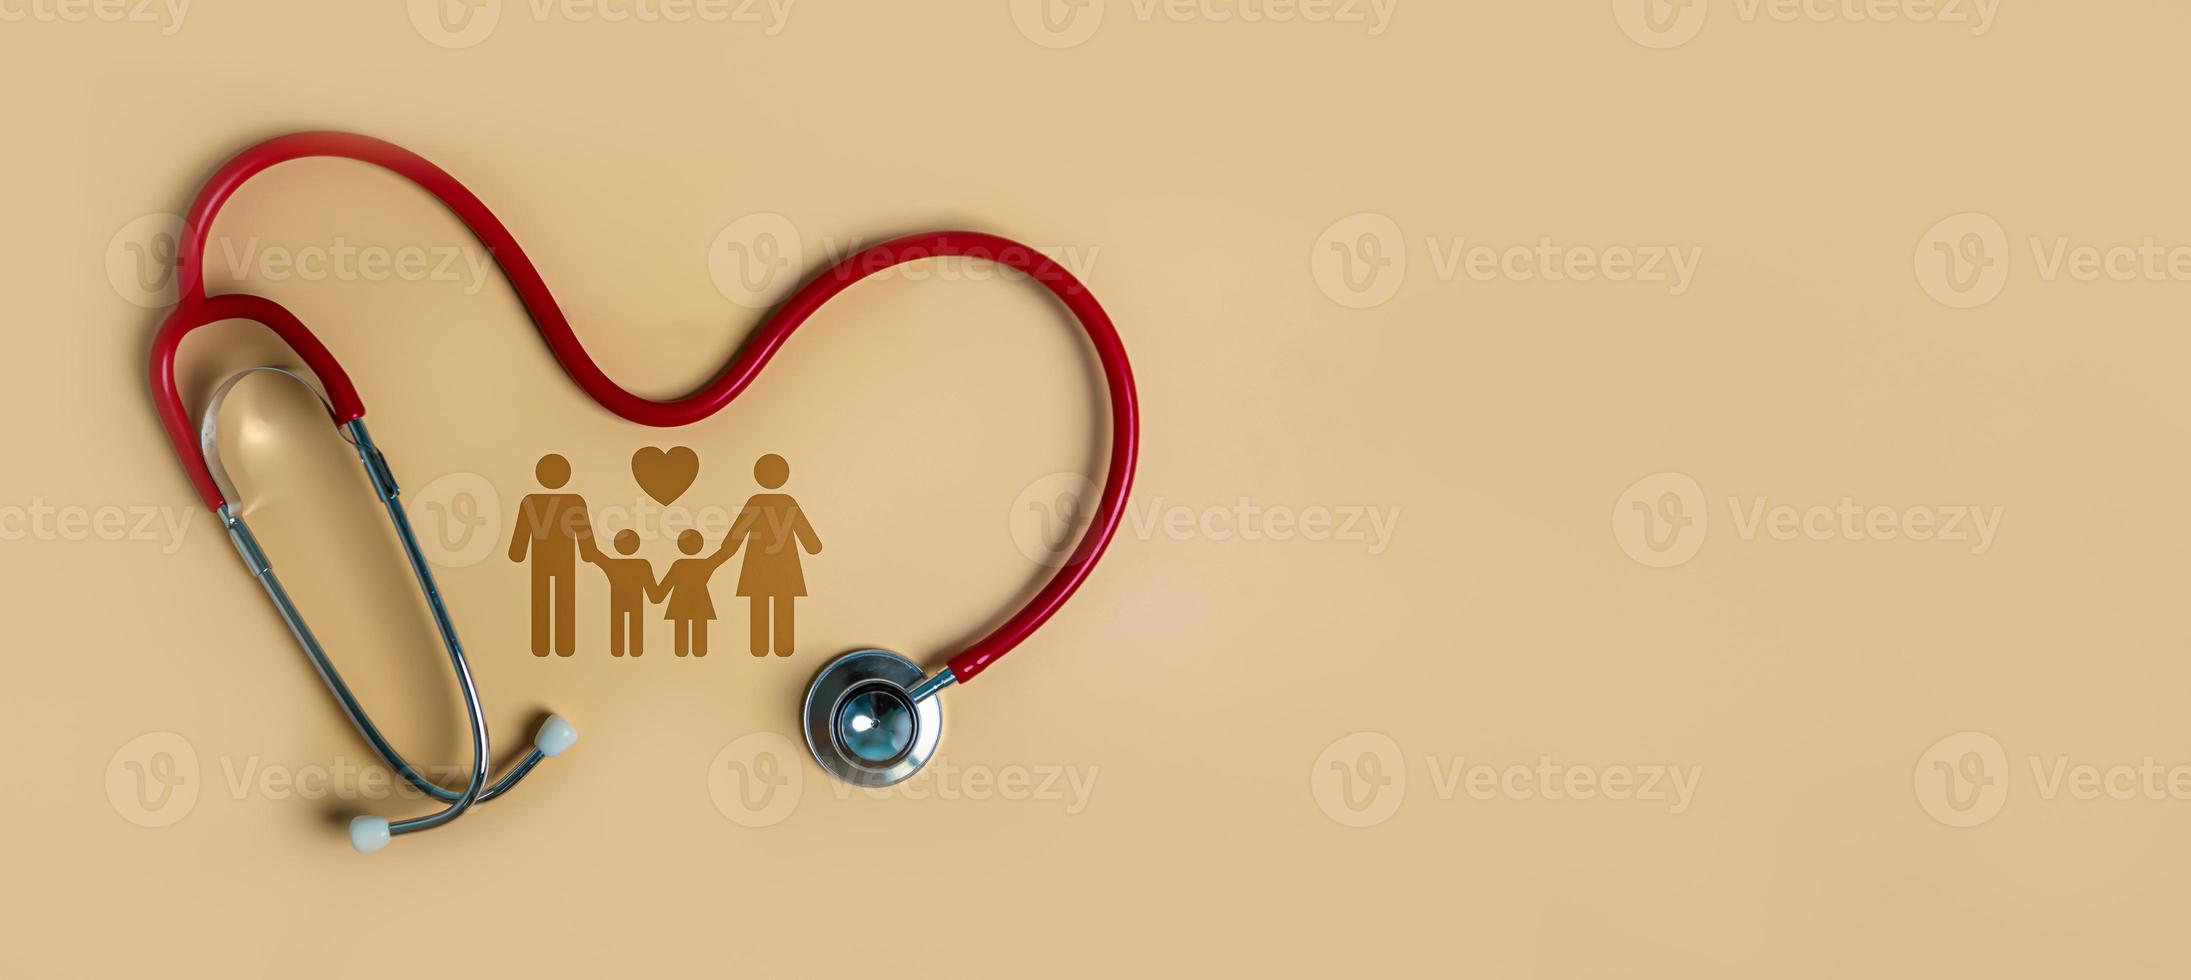 Top view of medical stethoscope and icon family on light orange background. Family health care insurance concept. photo